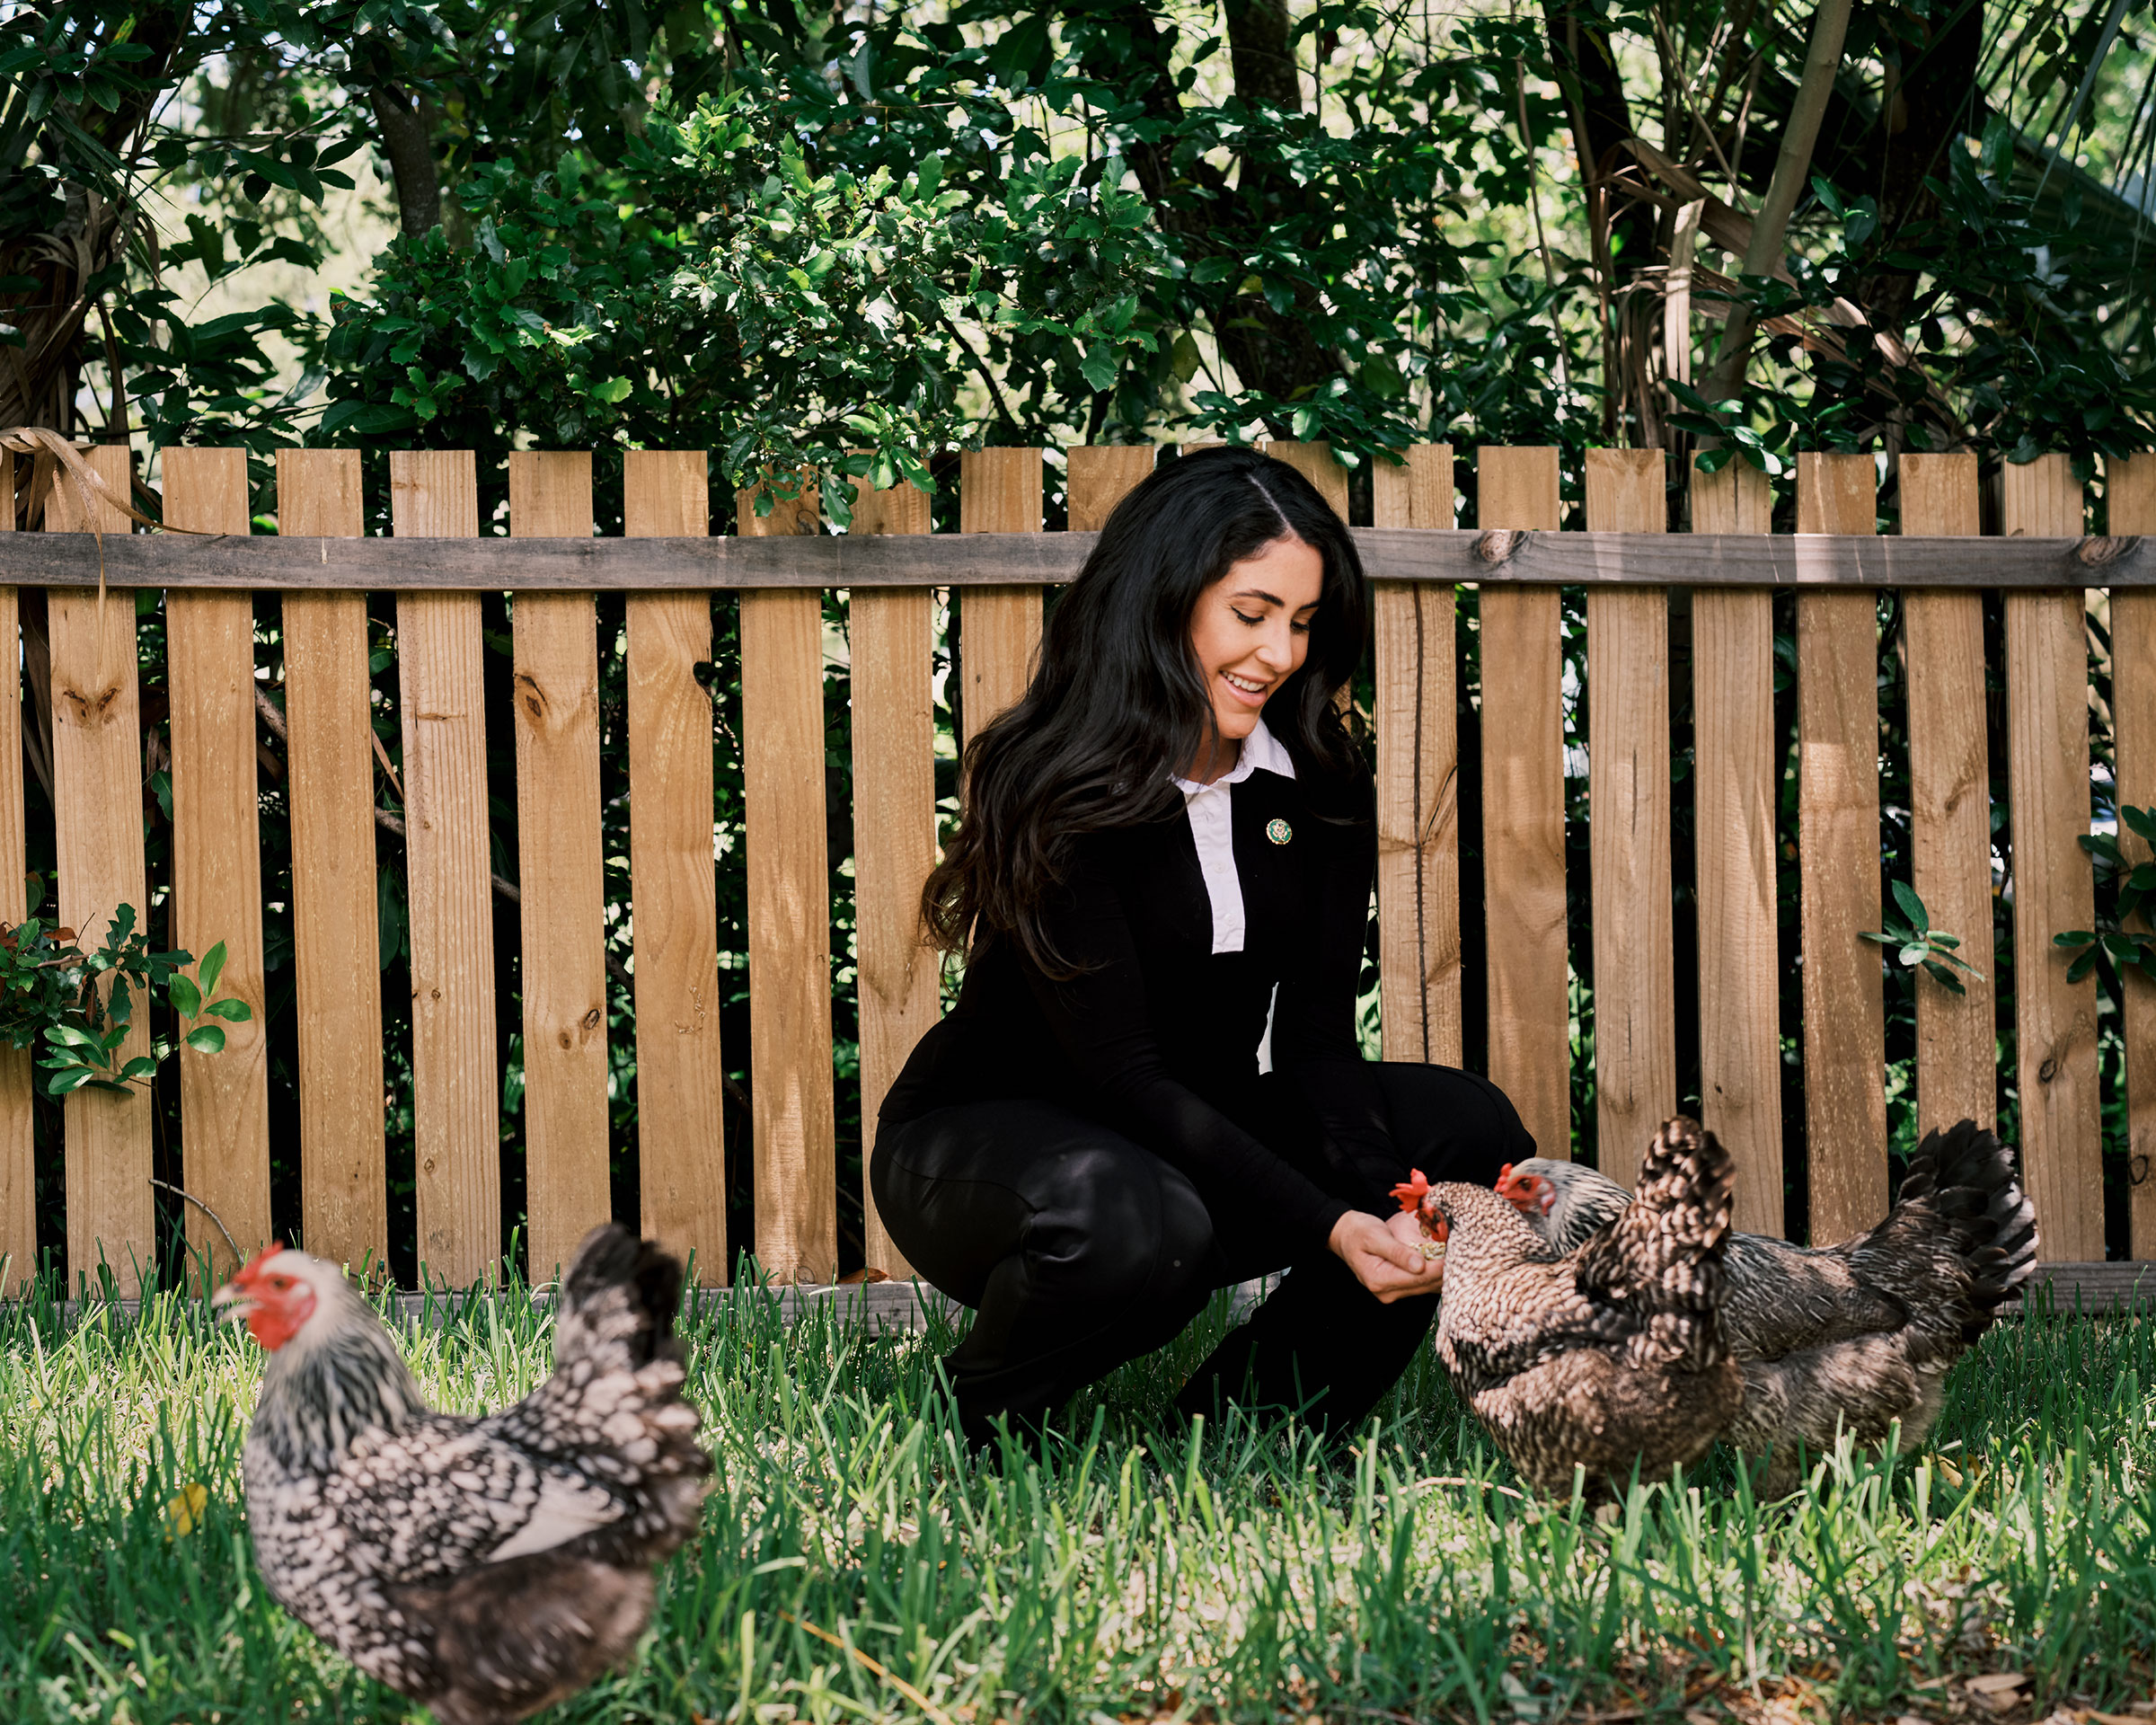 Luna feeds her chickens at home after returning from the office on July 6. (Zack Wittman for TIME)